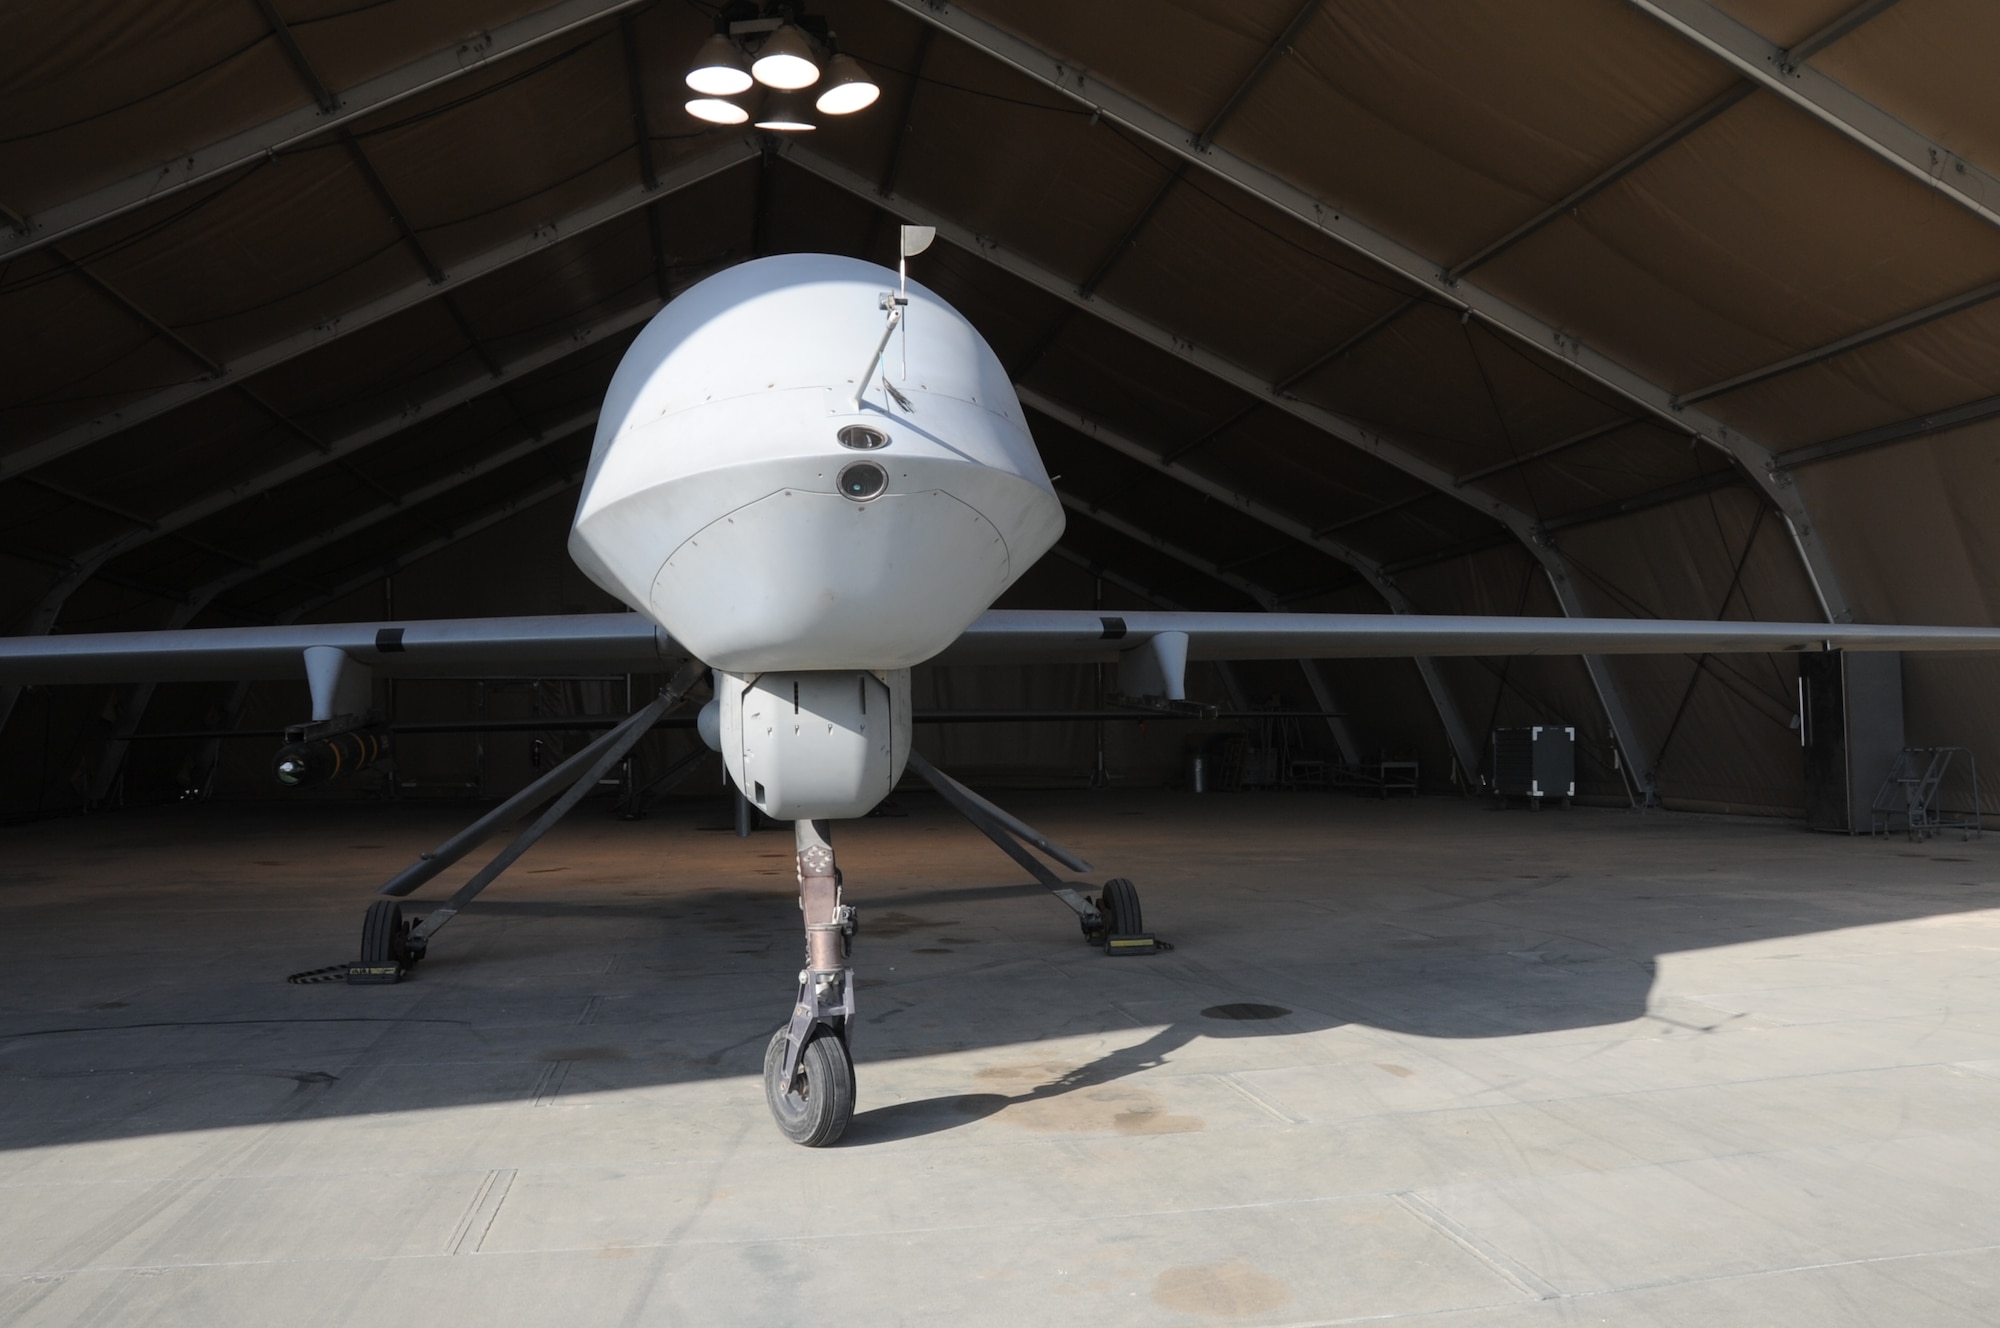 An MQ- 1 predator sits in a hangar Feb. 14, 2017 at an undisclosed location in Southwest Asia.  The 46th Expeditionary Reconnaissance Squadron flies the remotely piloted aircraft to destroy enemy targets and collect intelligence in support of Operation Inherent Resolve.  (U.S. Air Force photo/Tech. Sgt. Kenneth McCann)